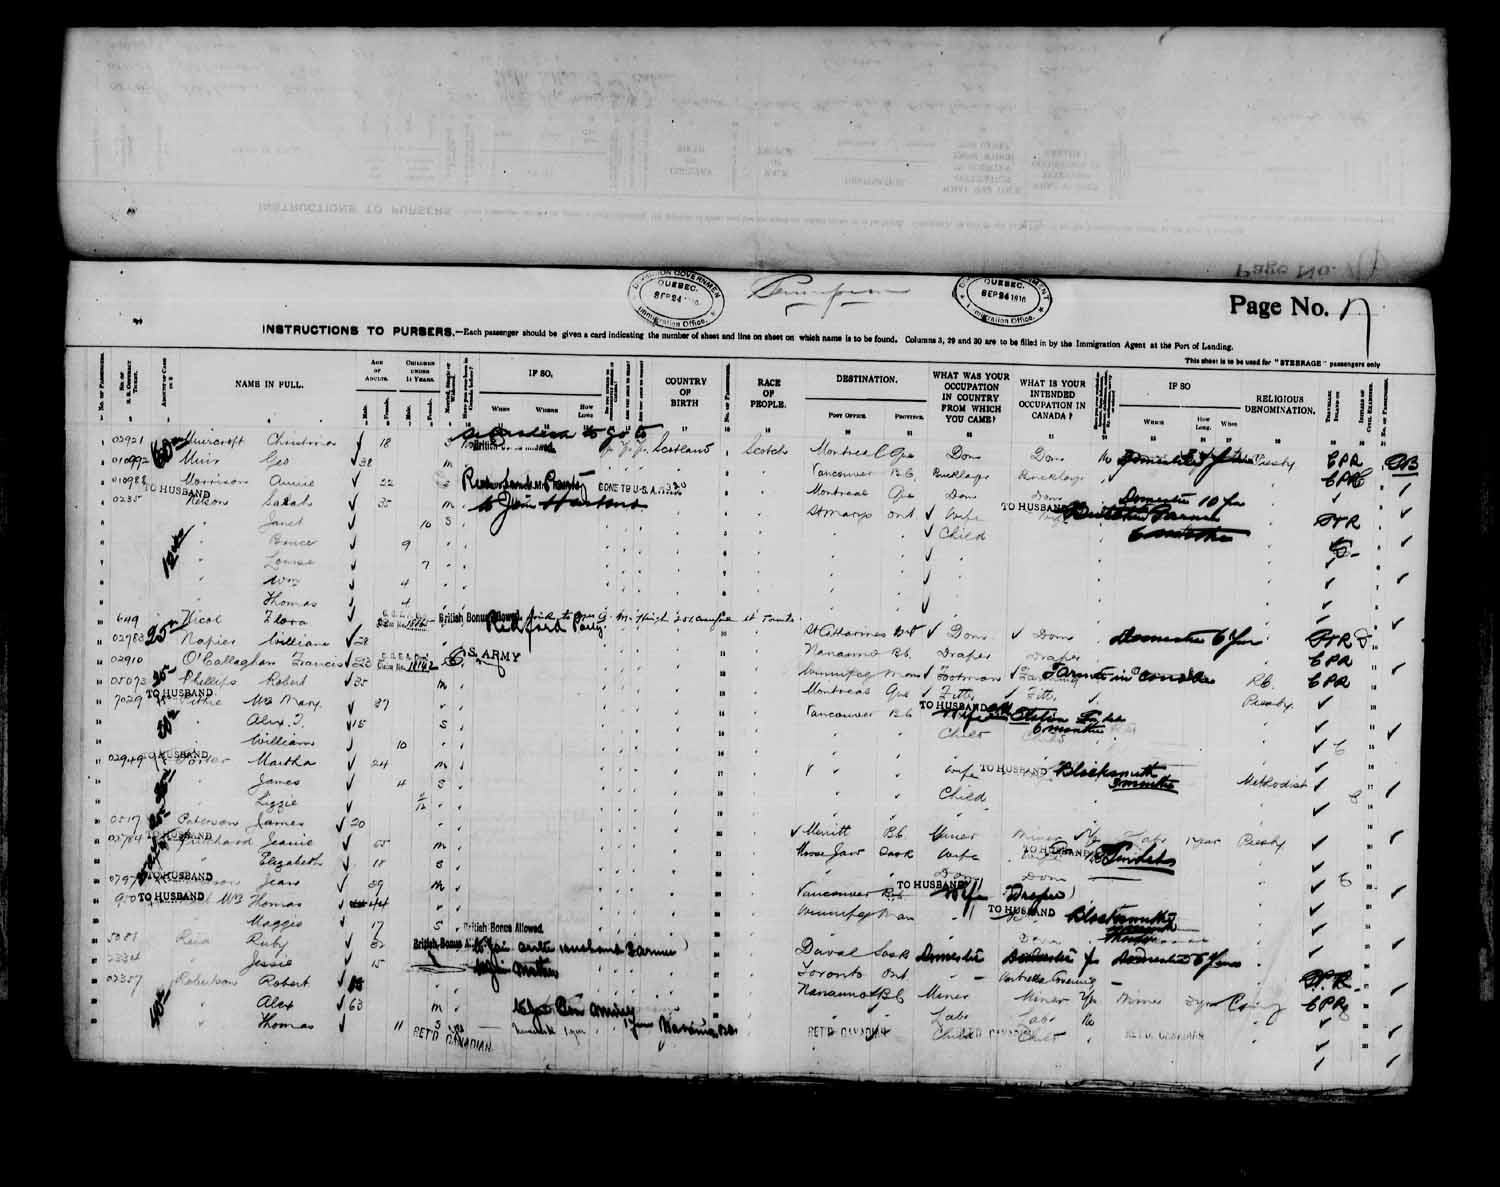 Digitized page of Passenger Lists for Image No.: e003566526